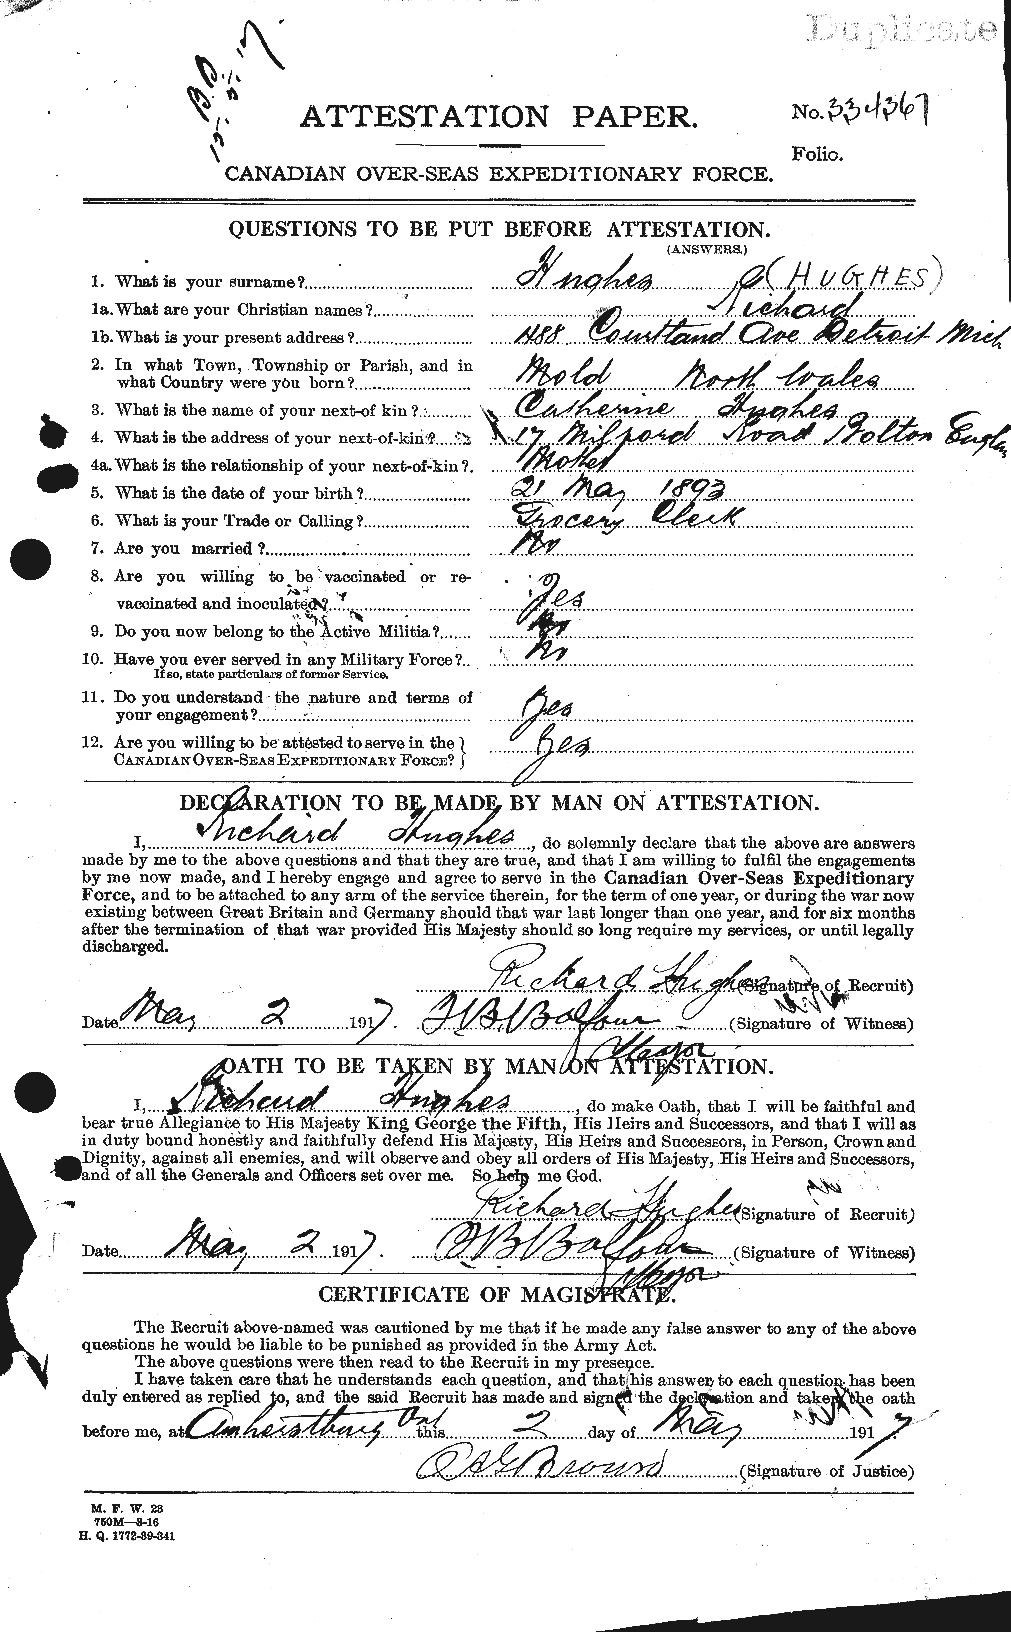 Personnel Records of the First World War - CEF 404182a